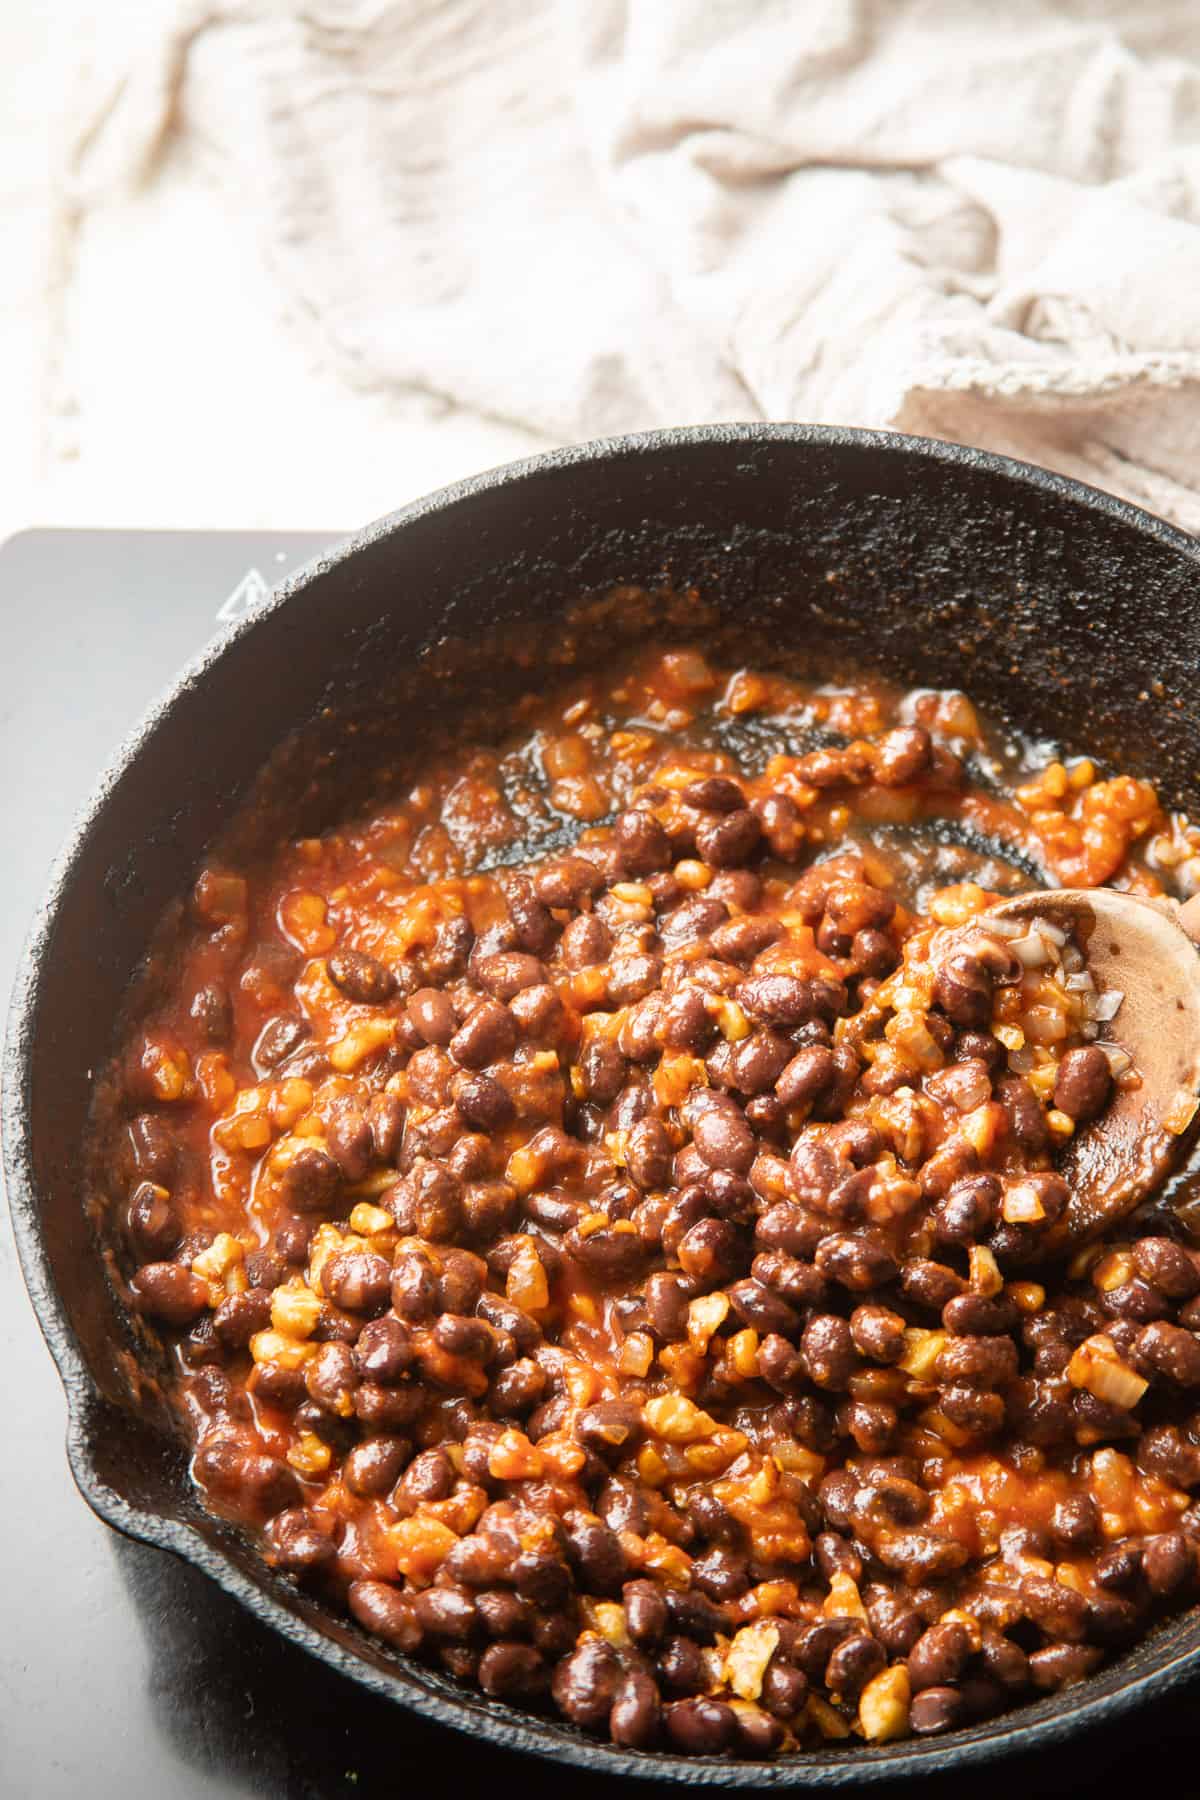 Black bean and walnut taco filling simmering in a skillet.